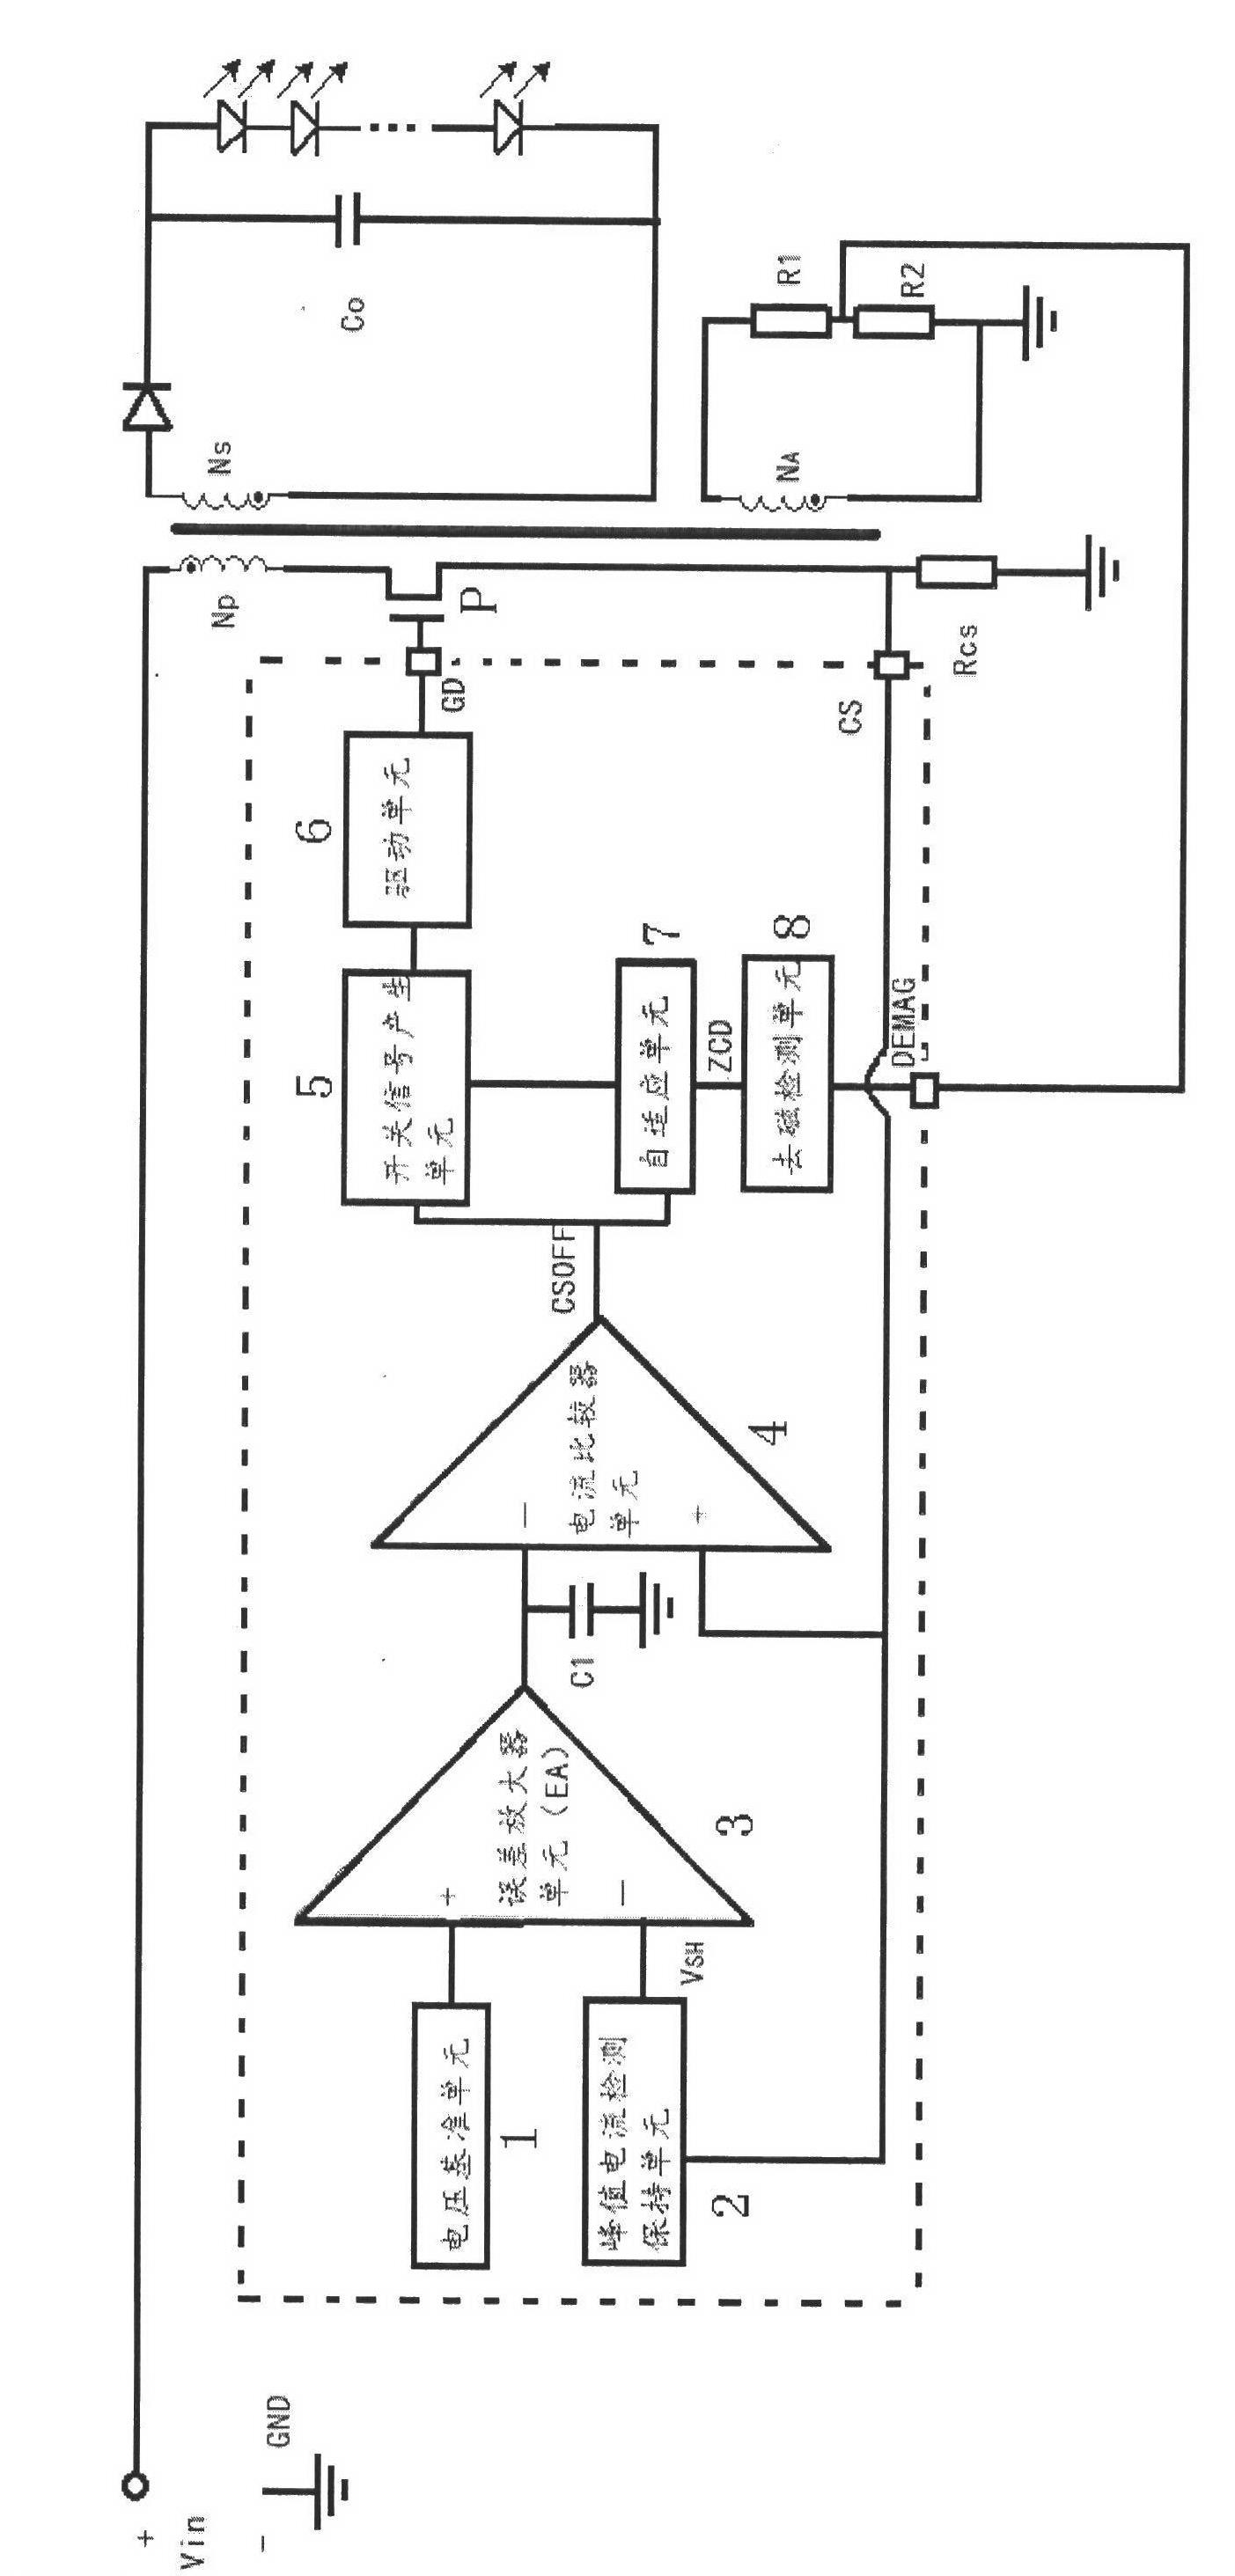 LED (Light Emitting Diode) constant-current driving circuit